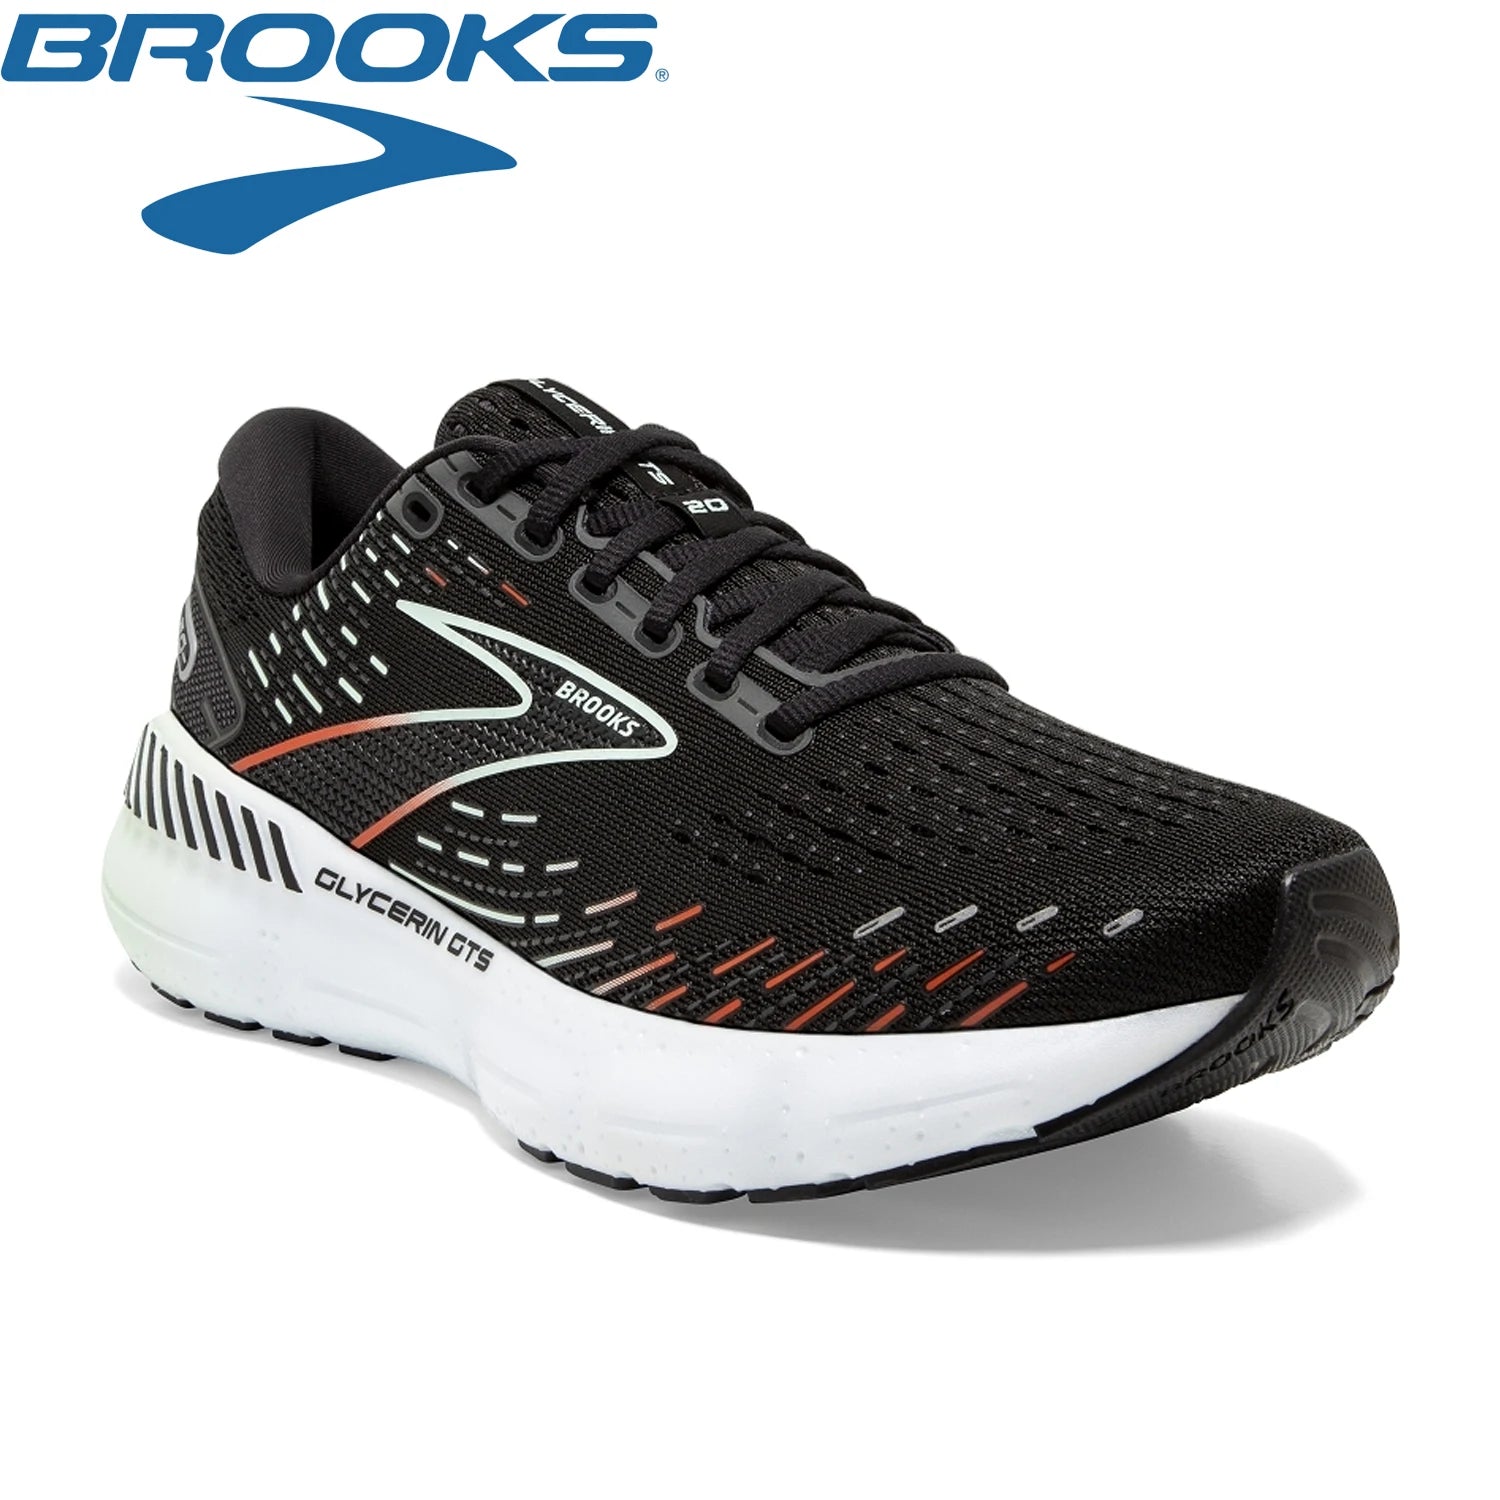 BROOKS Running Shoes Men Glycerin GTS 20 Outdoor Road Jogging Shoes Anti-Slip Soft Sole Elastic Breathable Tennis Sneakers Men